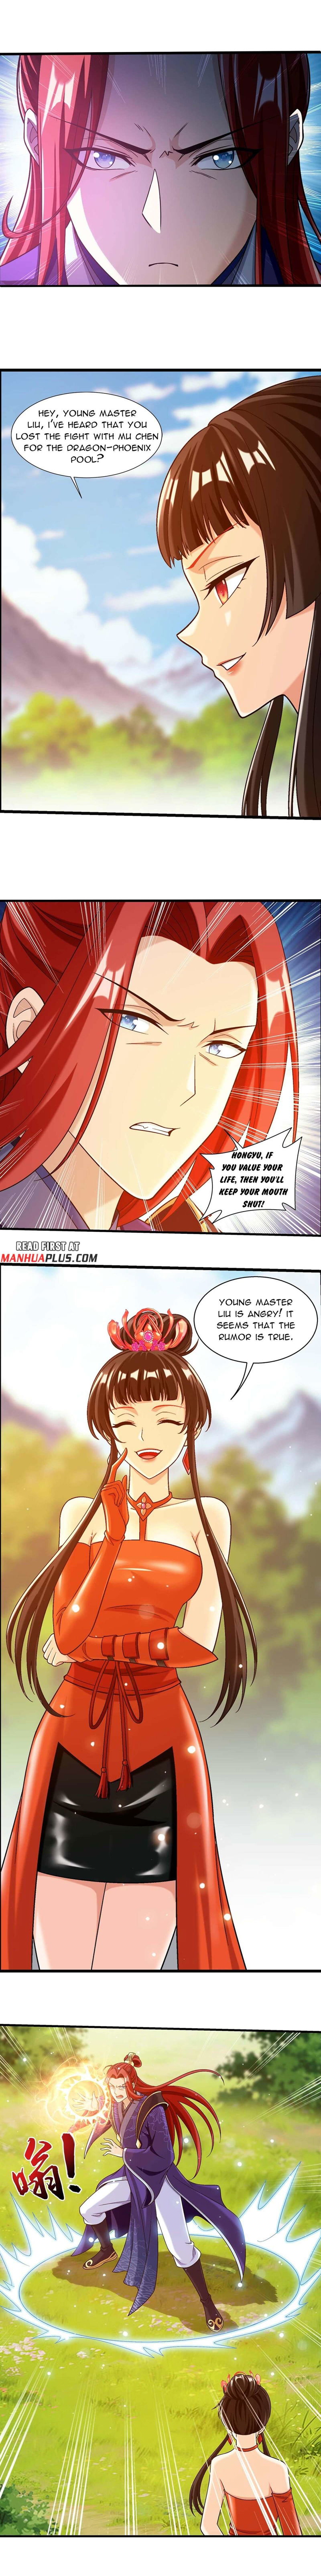 The Great Ruler Chapter 443 page 8